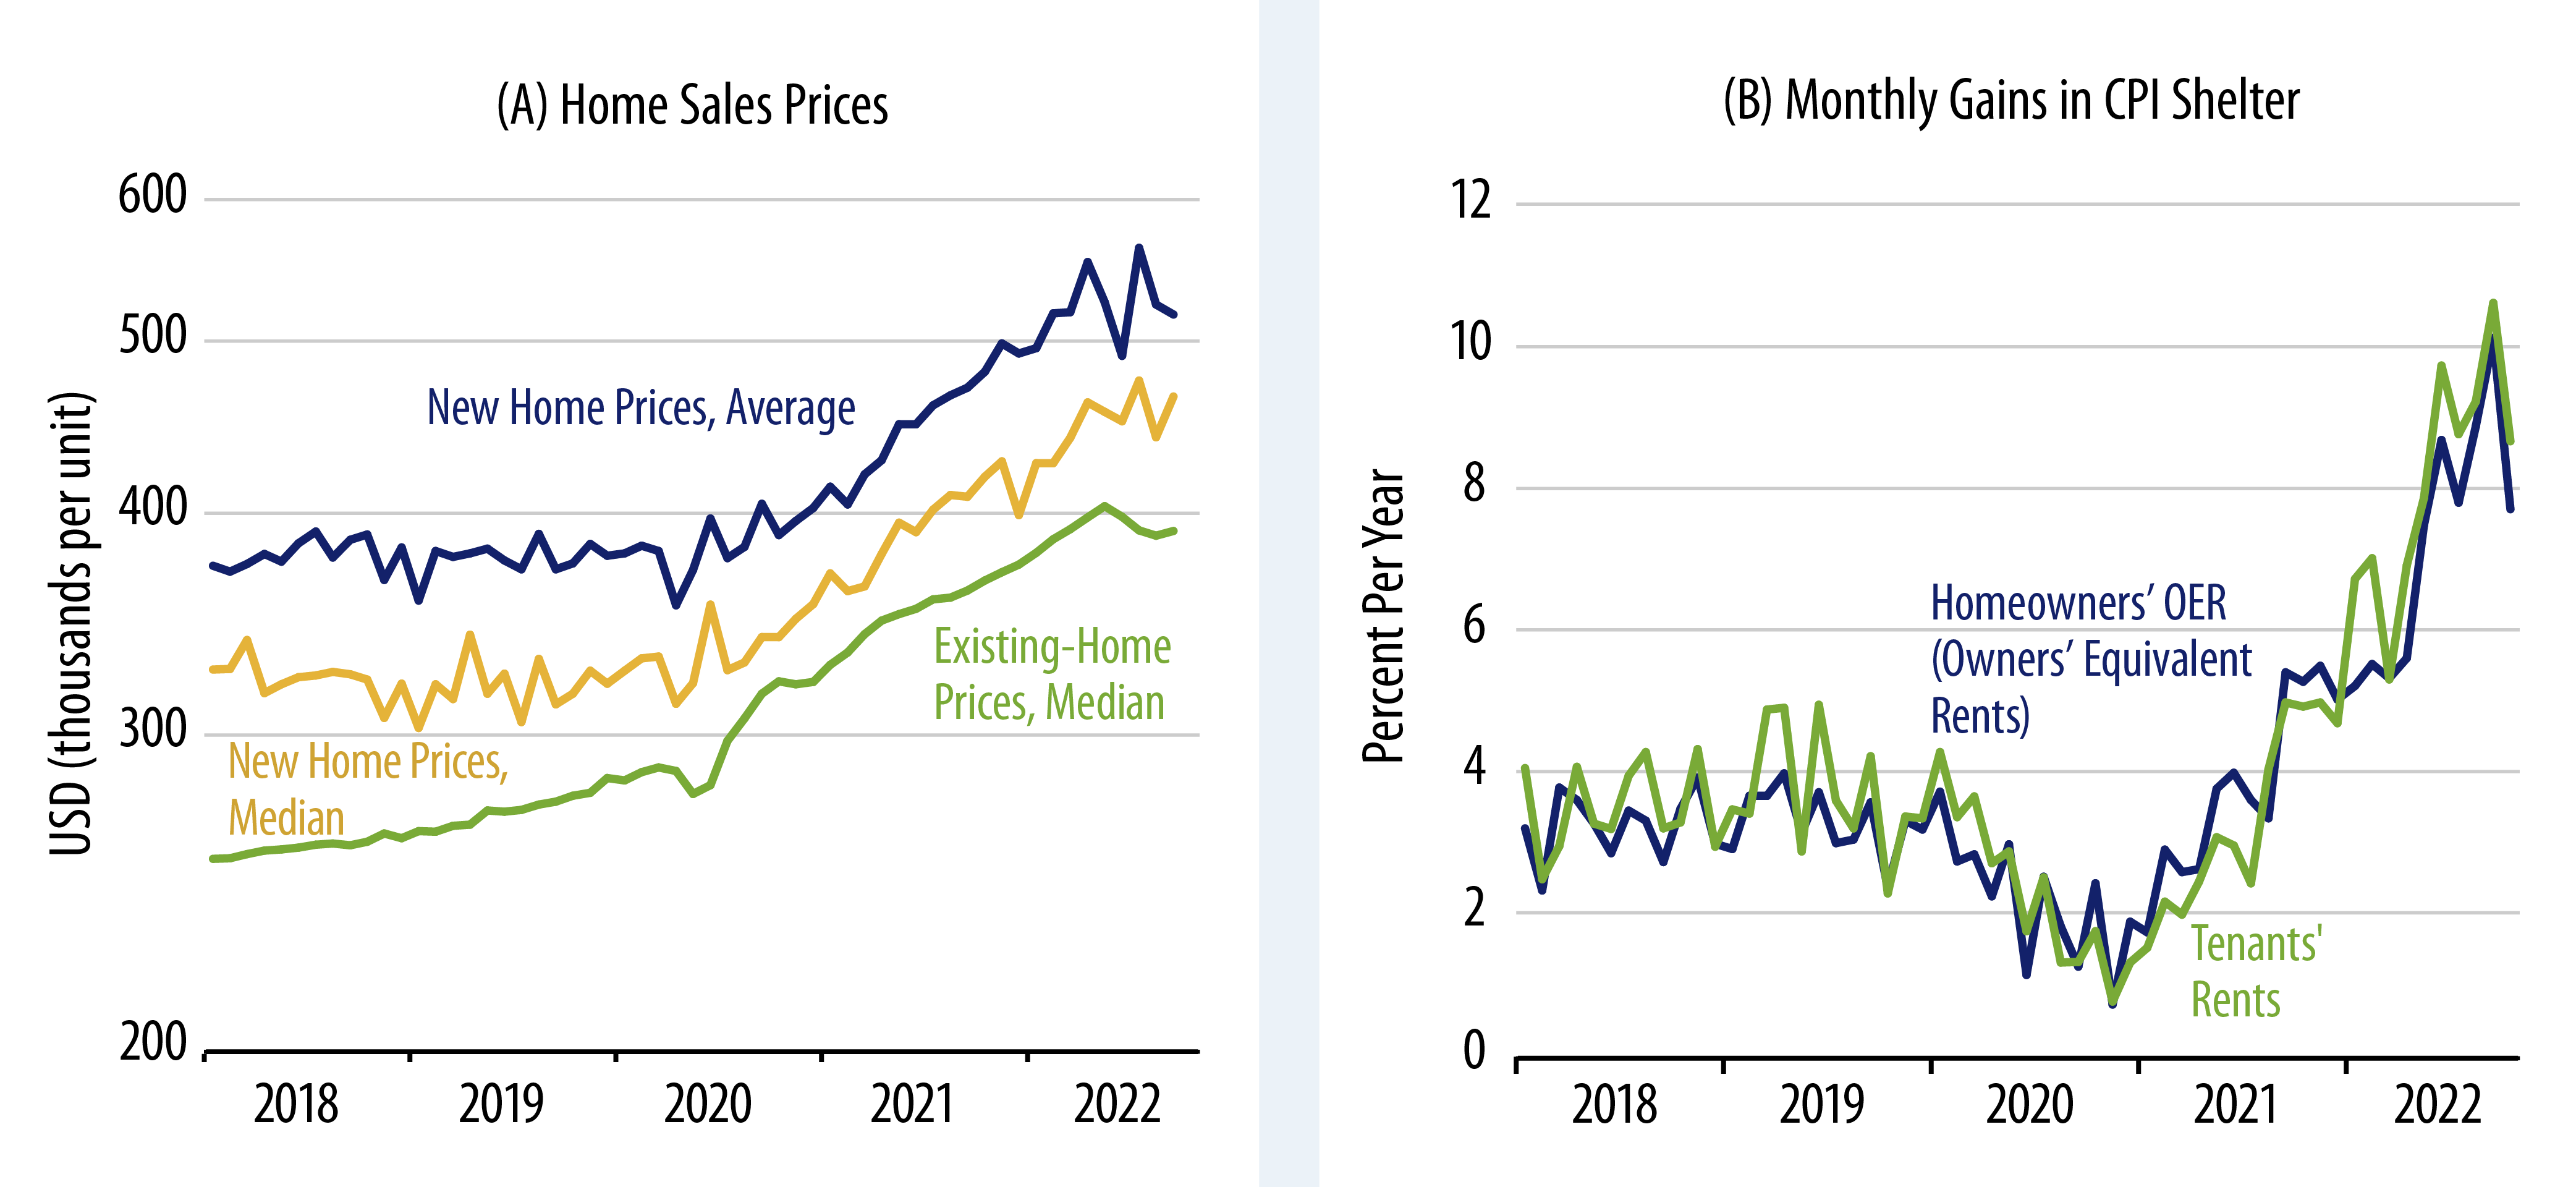 Home Sales and Rents